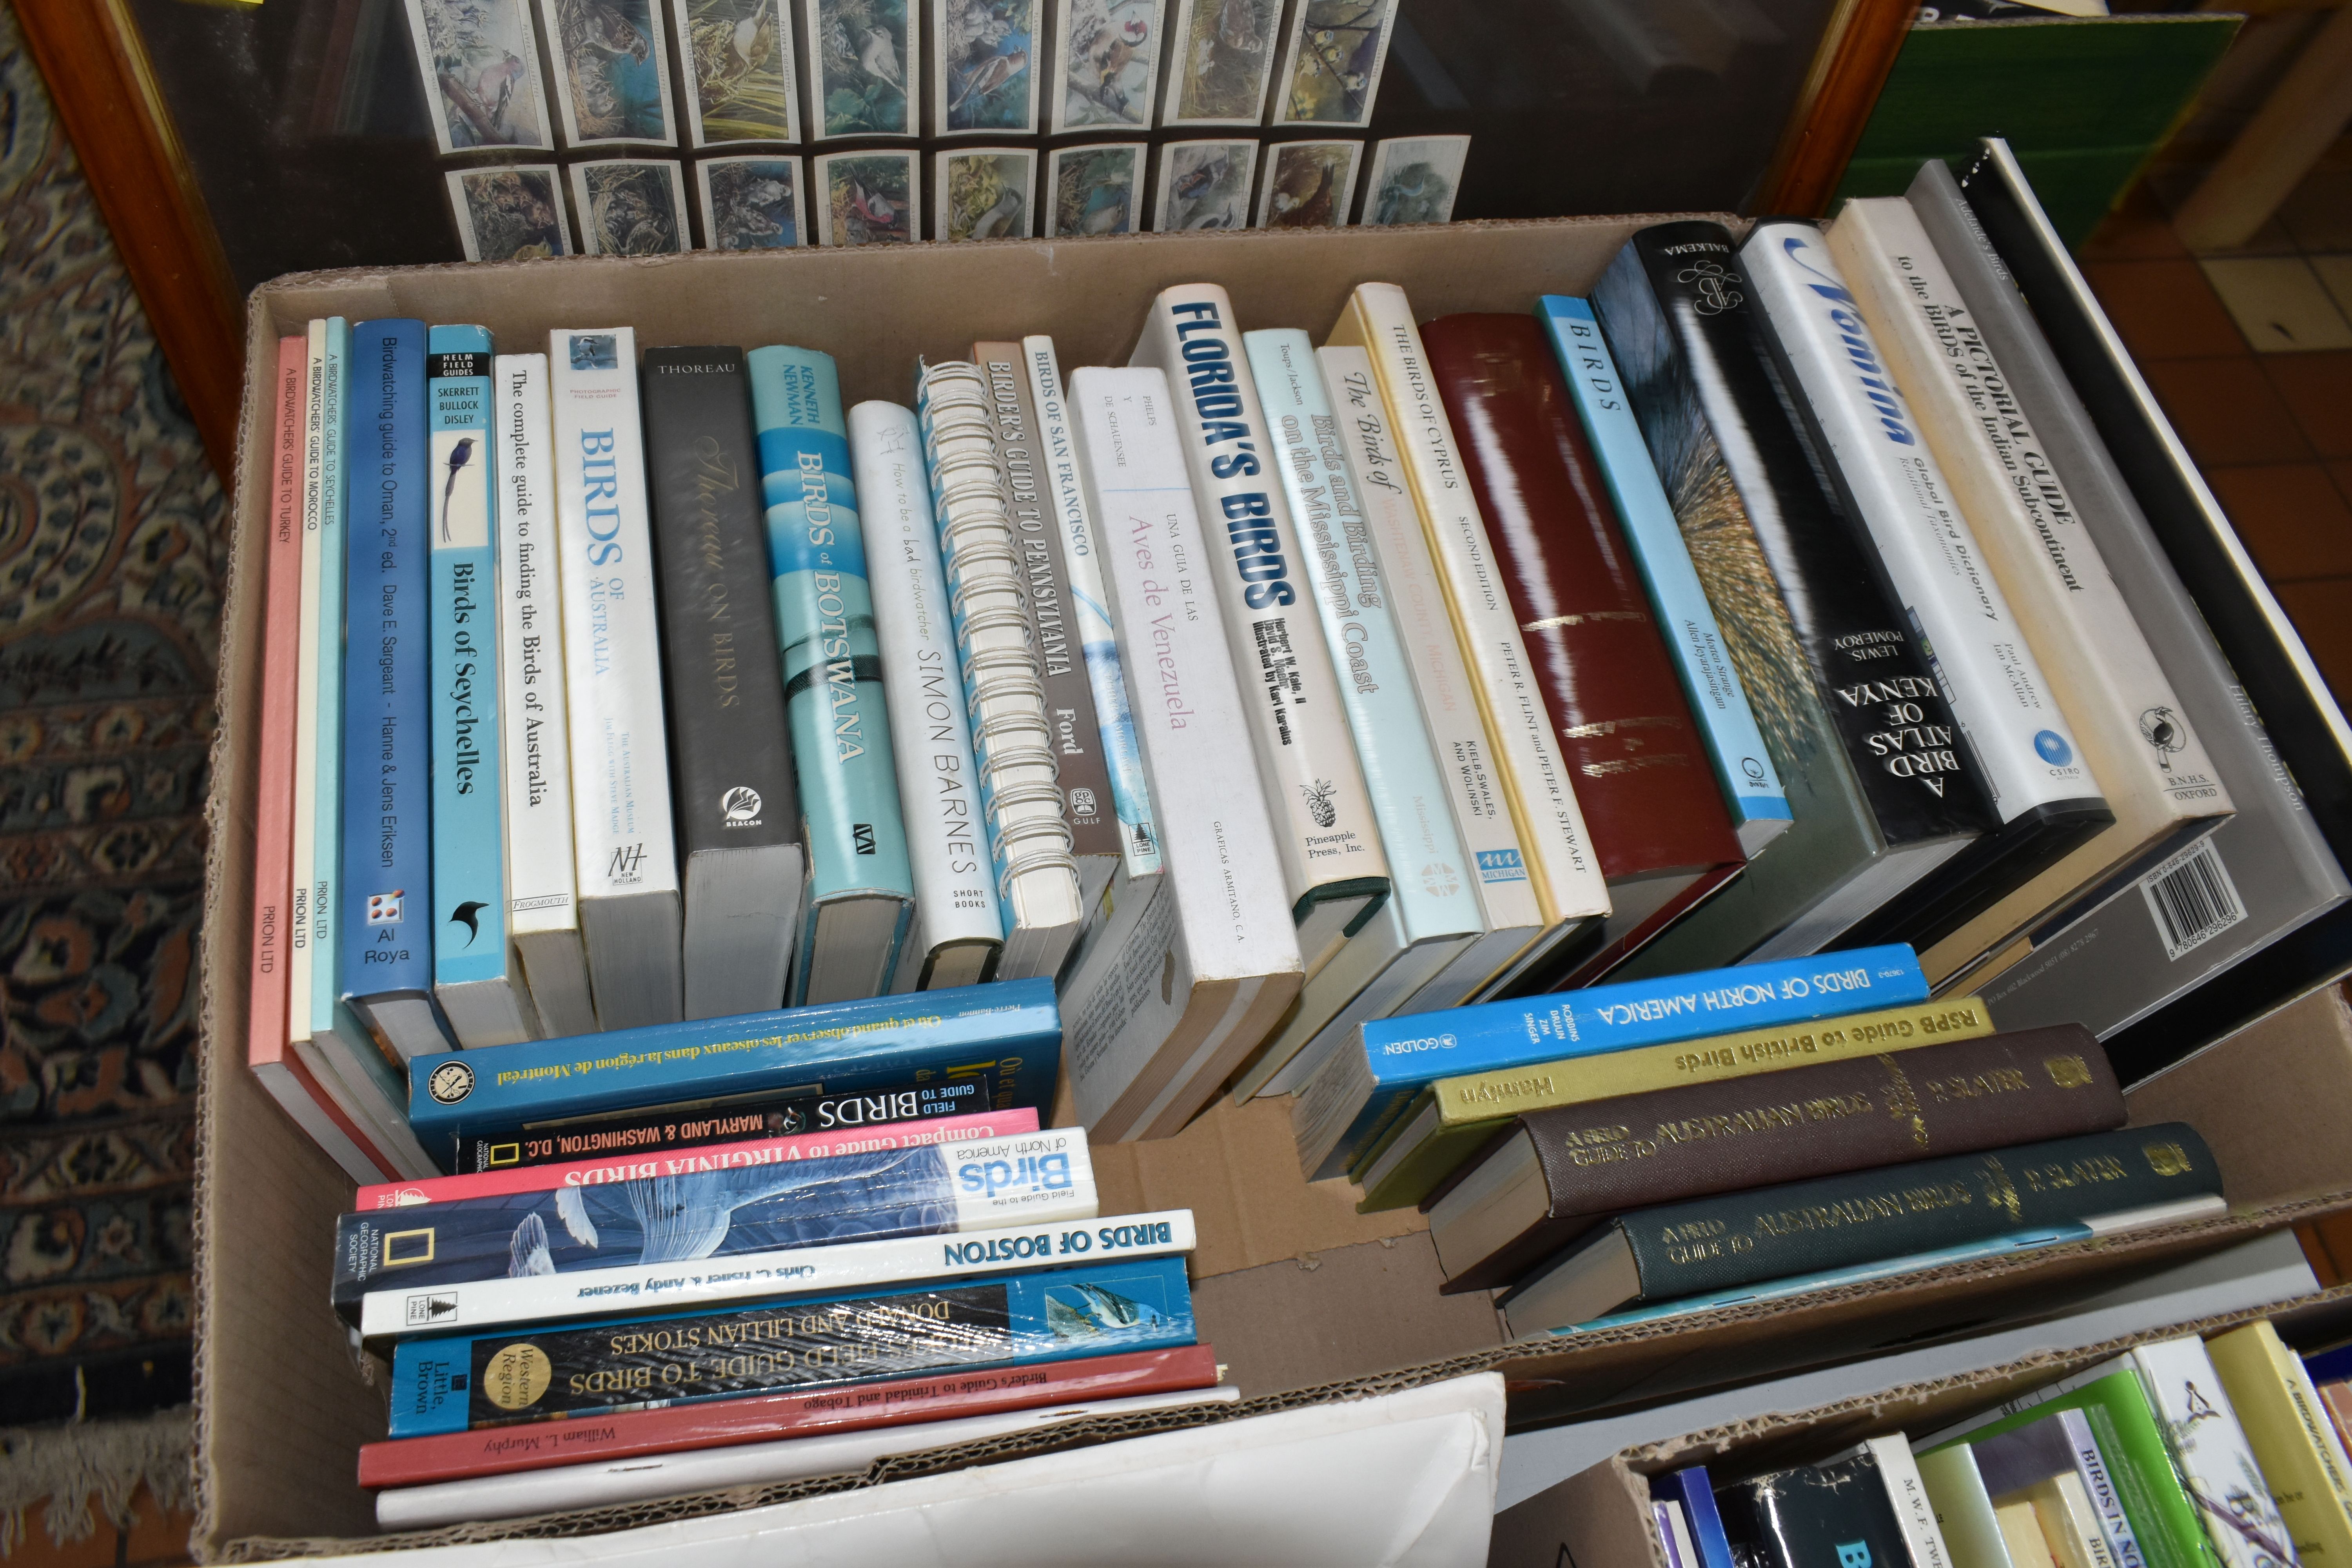 FIVE BOXES OF BOOKS containing approximately 125 titles in hardback and paperback formats on the - Image 4 of 6